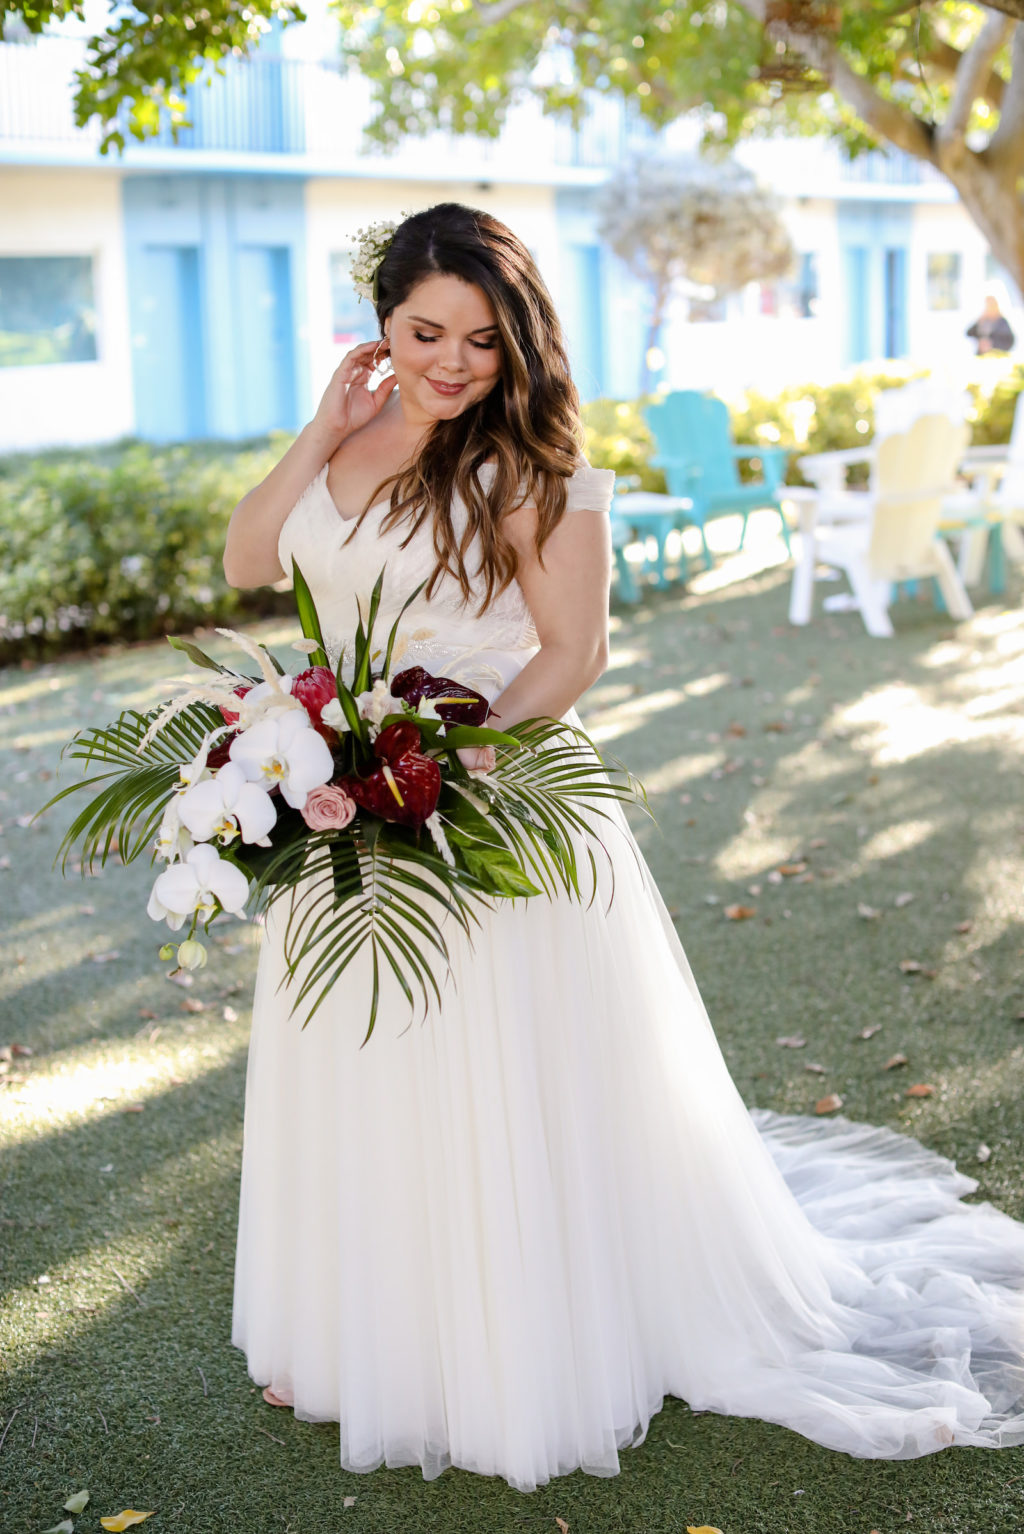 Tampa Bride Wearing Tull and Chantilly Lace Off the Shoulder Dreamy Boho Wedding Dress Holding Tropical White Orchid, Burgundy Anthuriums and Palm Fronds Floral Bouquet | St. Pete Beach Wedding Venue Postcard Inn | Tampa Bay Wedding Photographer Lifelong Photography Studio | Wedding Florist Iza's Flowers